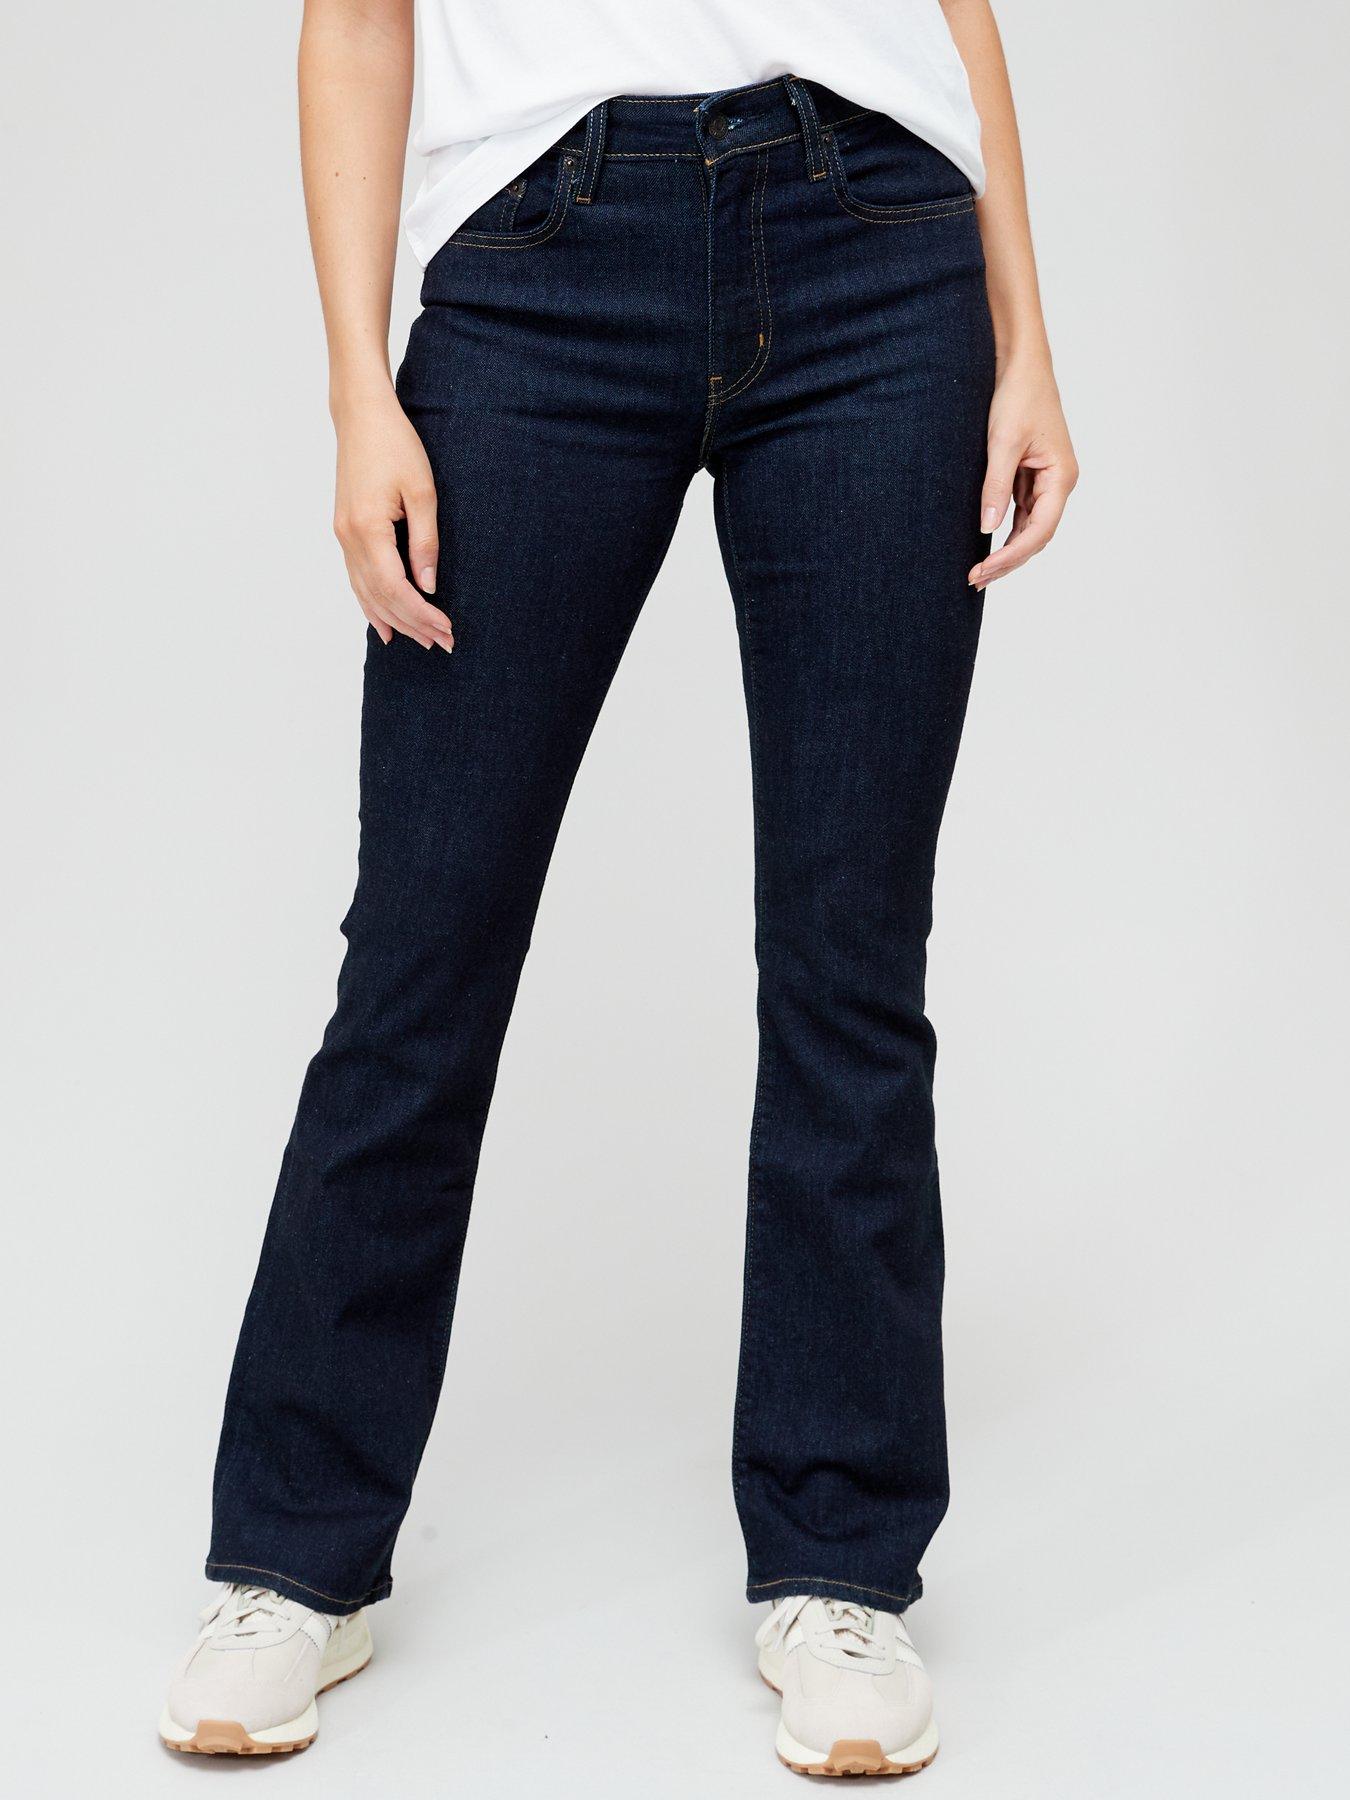 Women's Recover High Rise Bootcut Blue Jeans